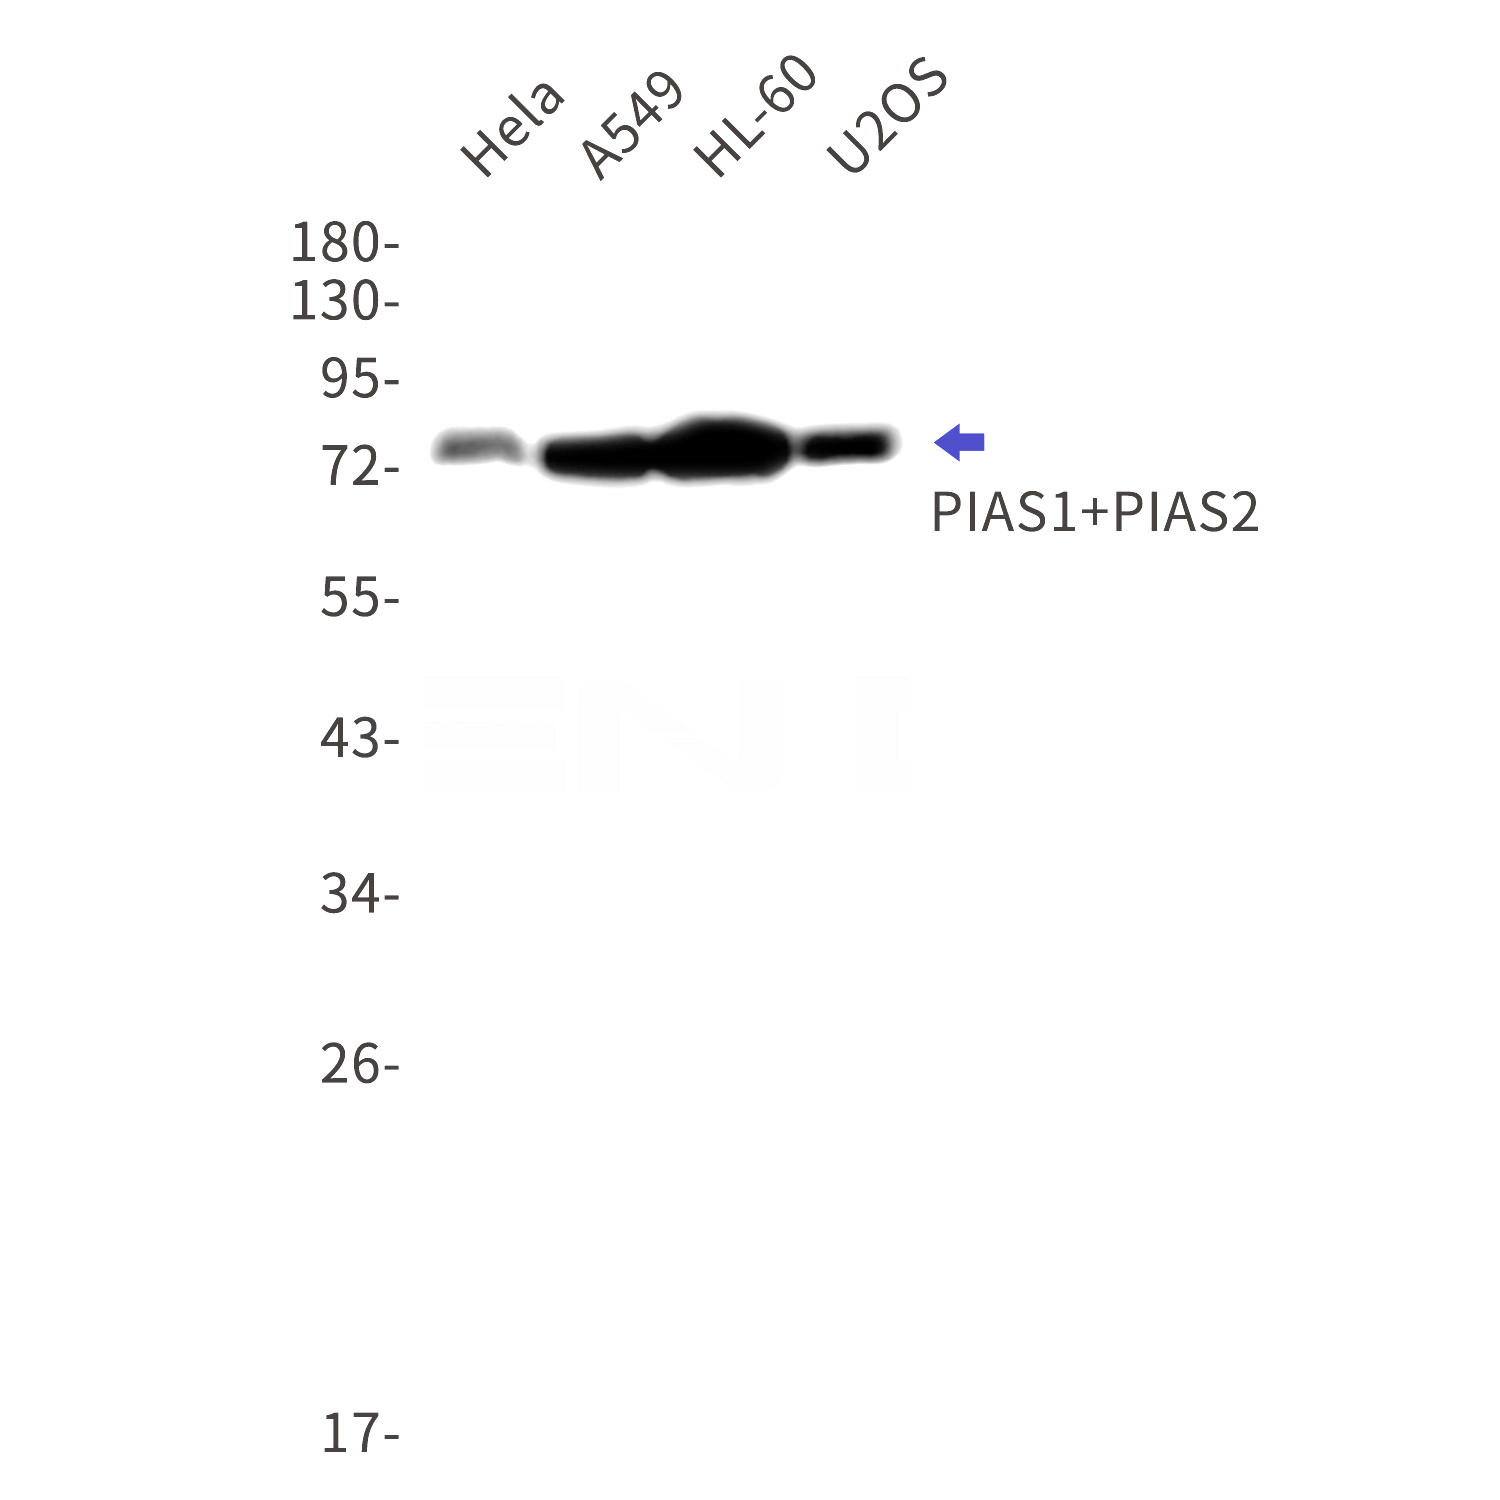 Western blot detection of PIAS1+PIAS2 in Hela,A549,HL-60,U2OS cell lysates using PIAS1+PIAS2 Rabbit mAb(1:1000 diluted).Observed band size:76kDa.